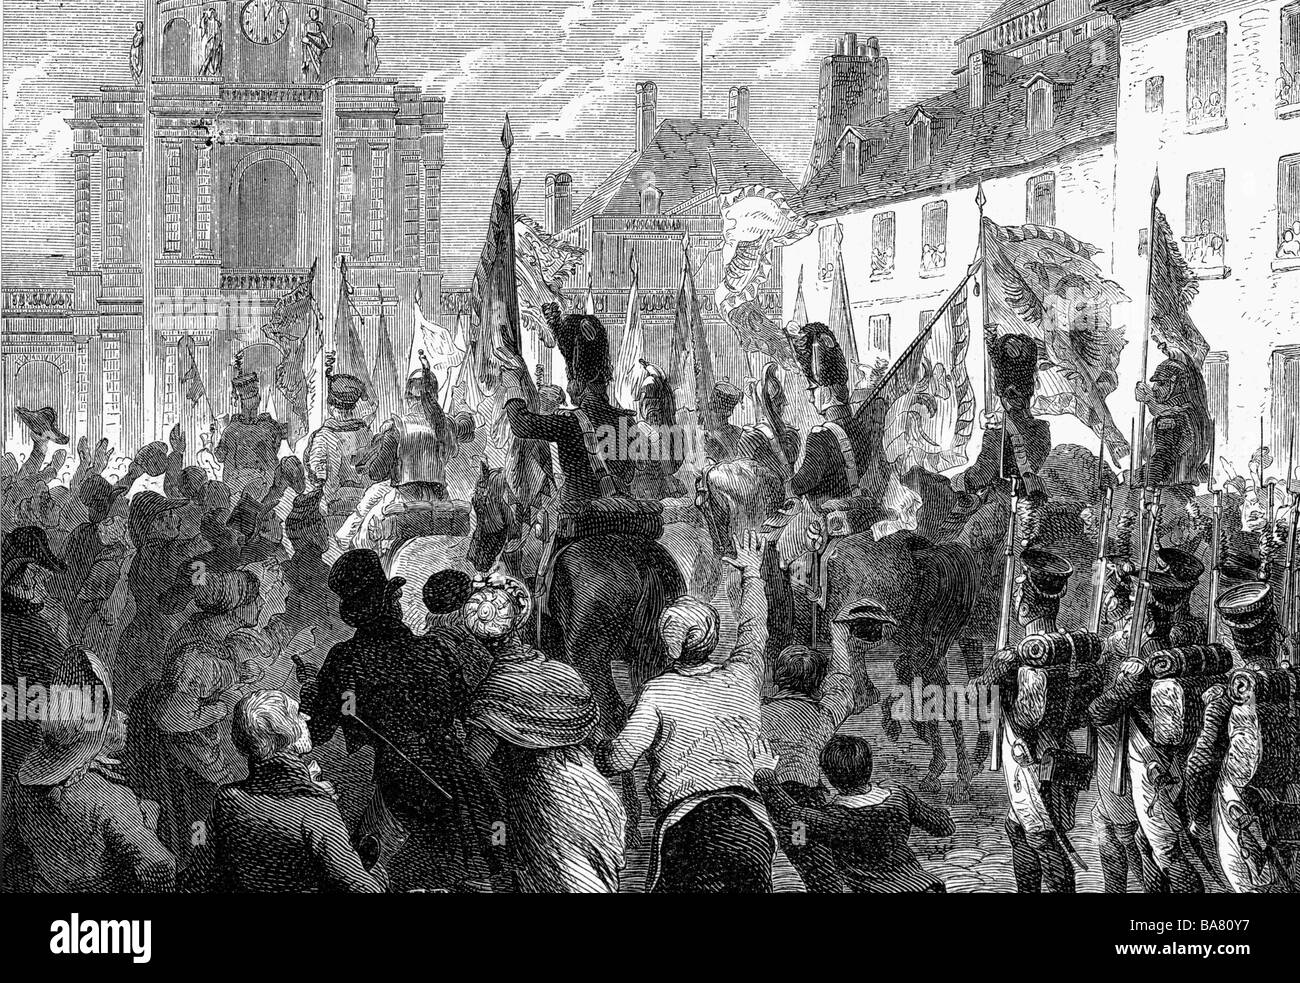 events, War of the Third Coalition, 1805, Austrian flags captures at Ulm are carried to the Senate, Paris, 1805, wood engraving, 19th century, Napoleonic Wars, France, triumph, victory, historic, historical, people, Stock Photo